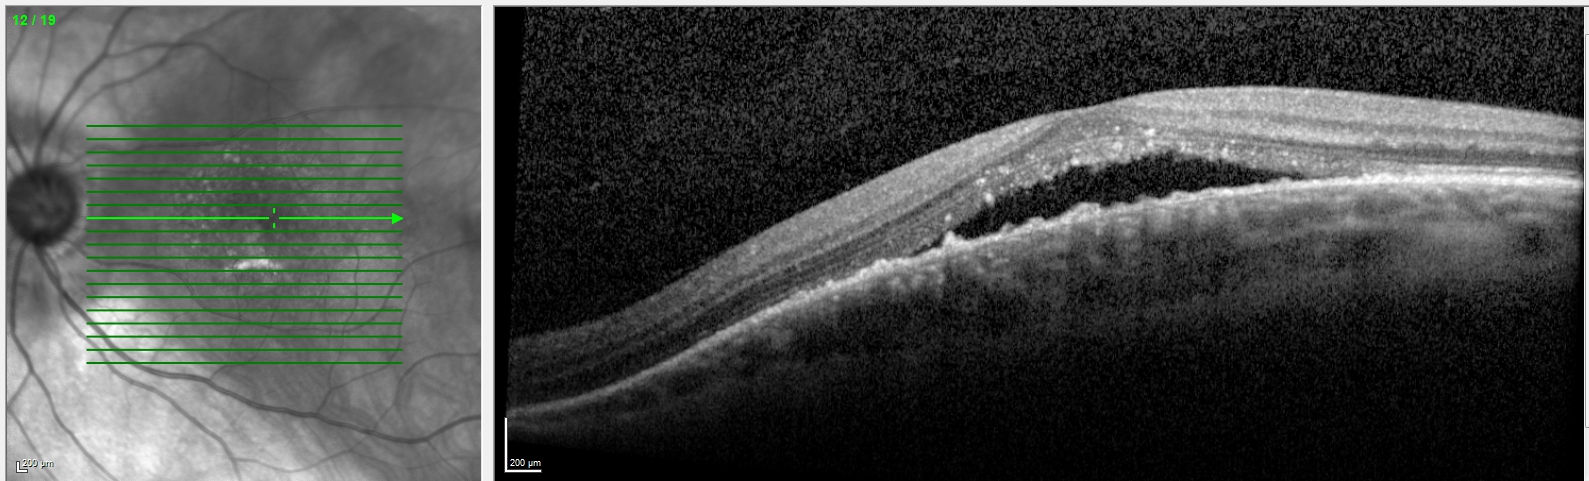 Dome shaped maculopathy with subretinal fluid
More apparent in vertical OCT scan